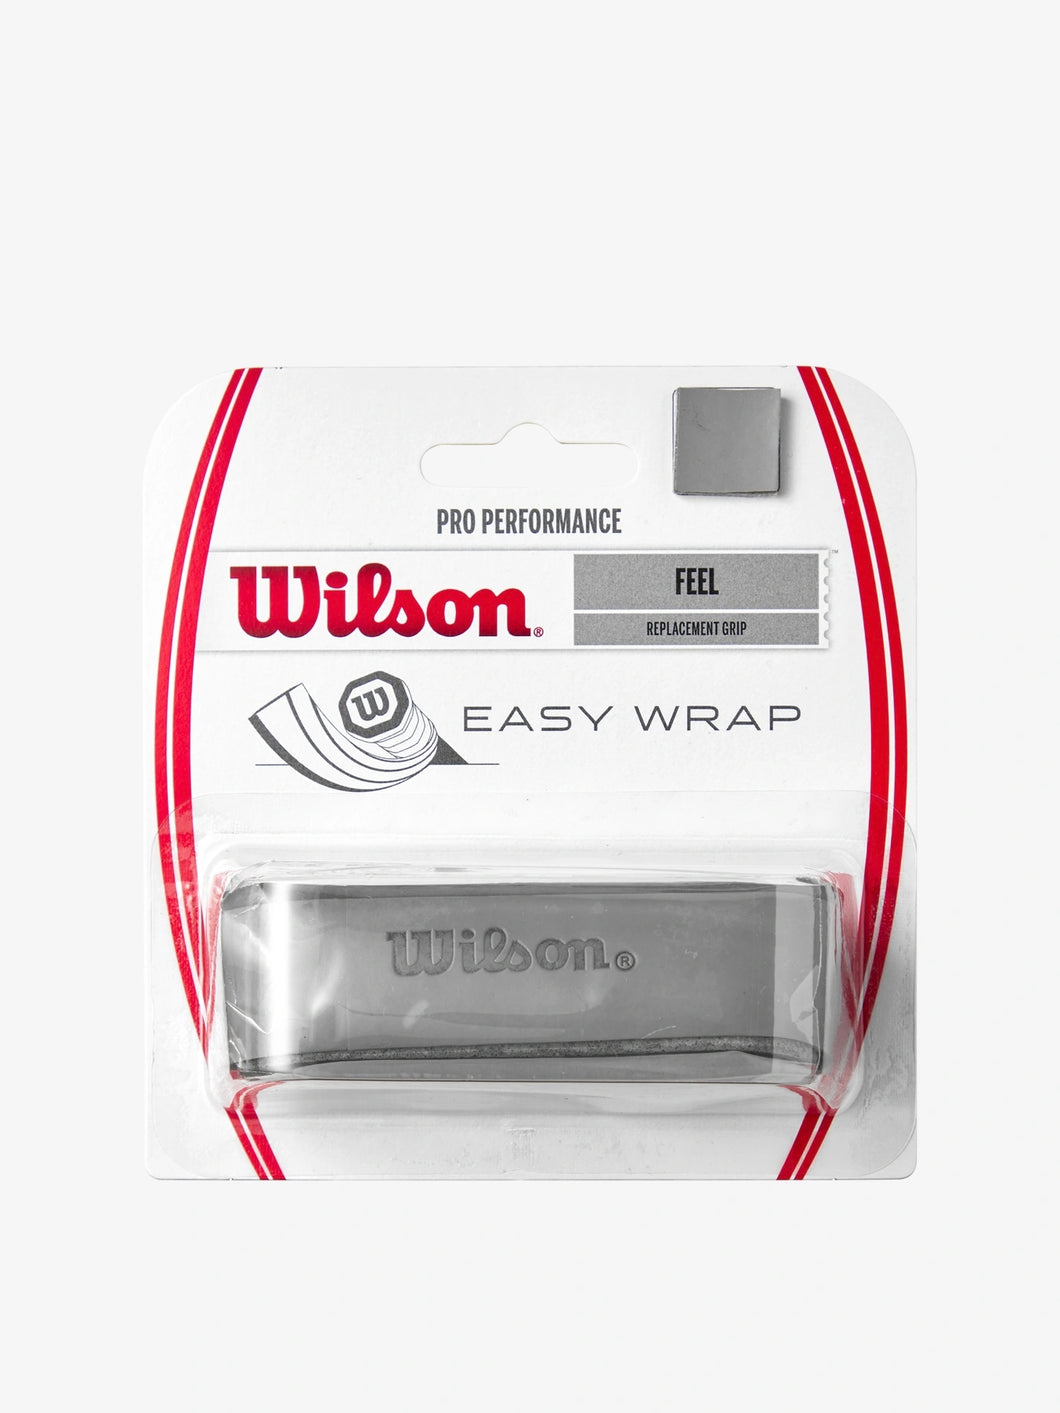 Wilson's Pro Performance Replacement Grip yields a soft, tacky surface for ultimate feel. Easy Wrap Technology makes it super easy and simple to apply the grip